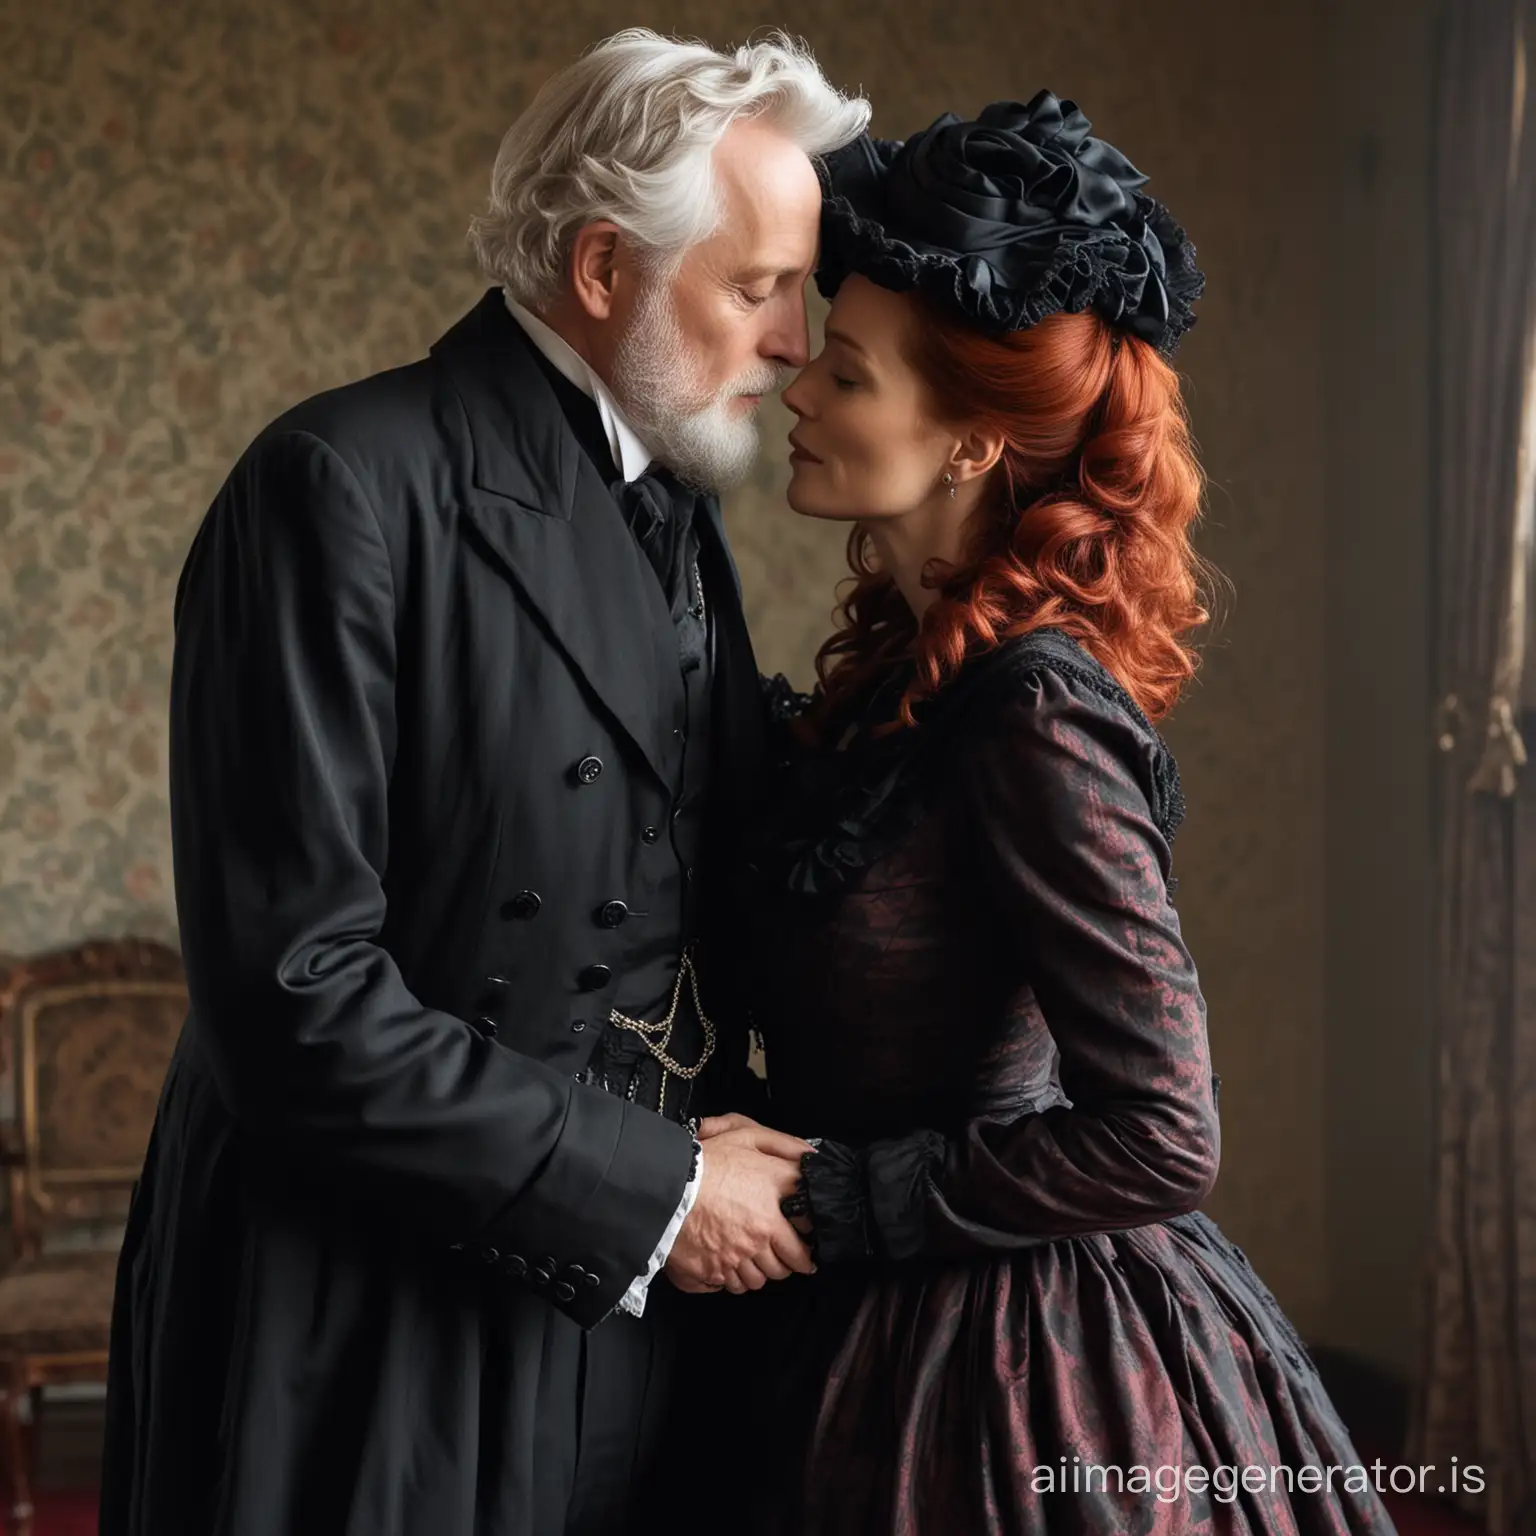 red hair Gillian Anderson wearing a dark crimson floor-length loose billowing 1860 Victorian crinoline dress with a frilly bonnet kissing an old man dressed in a black Victorian suit who seems to be her newlywed husband